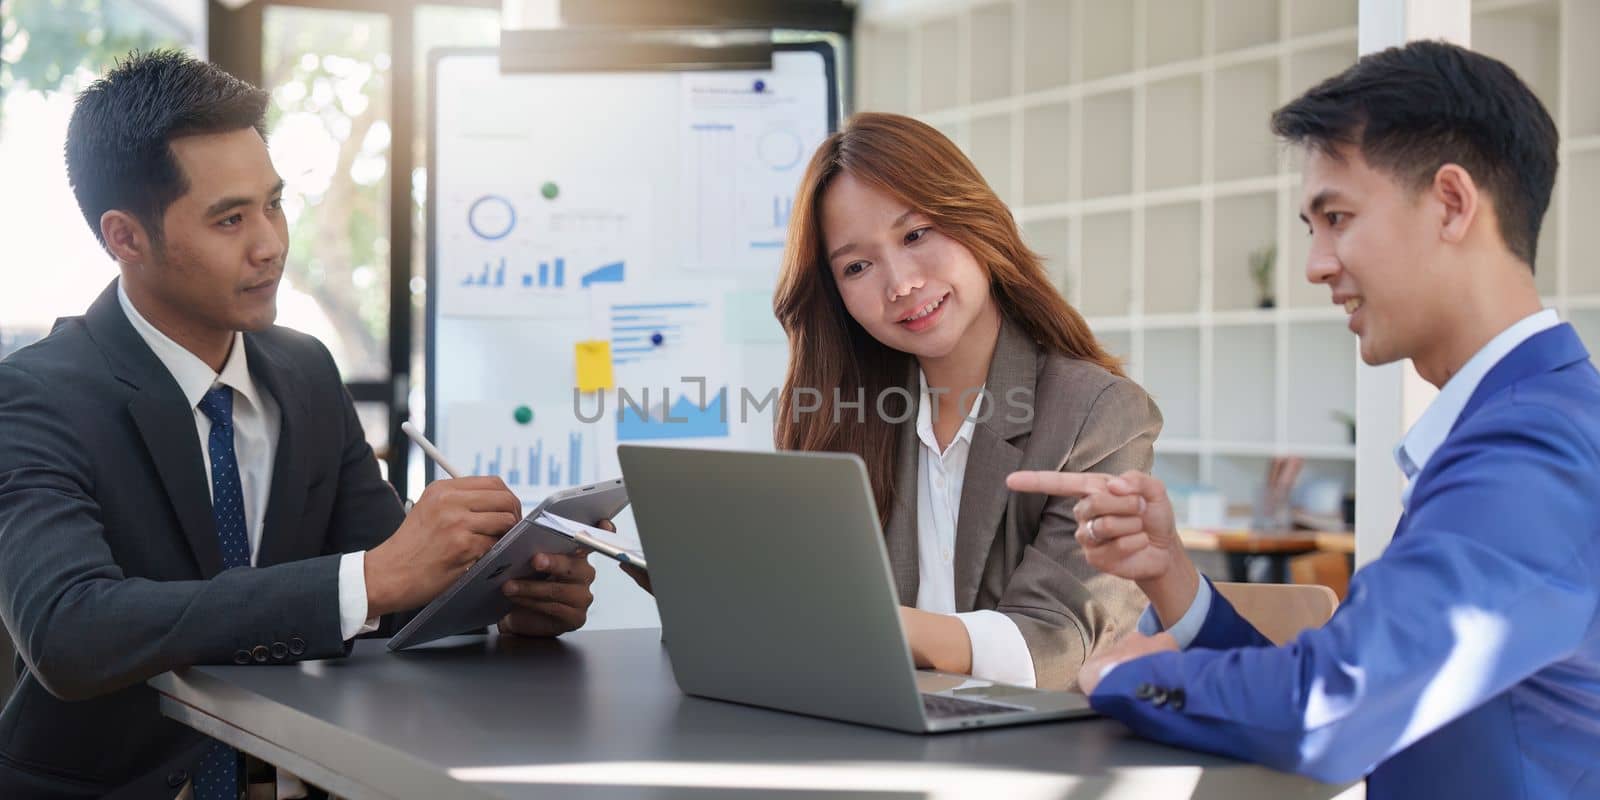 Financial analyst analyzes business people investment consultant analyzing company financial report working with documents graphs. Stock Market Tax Fund Finance concept by itchaznong